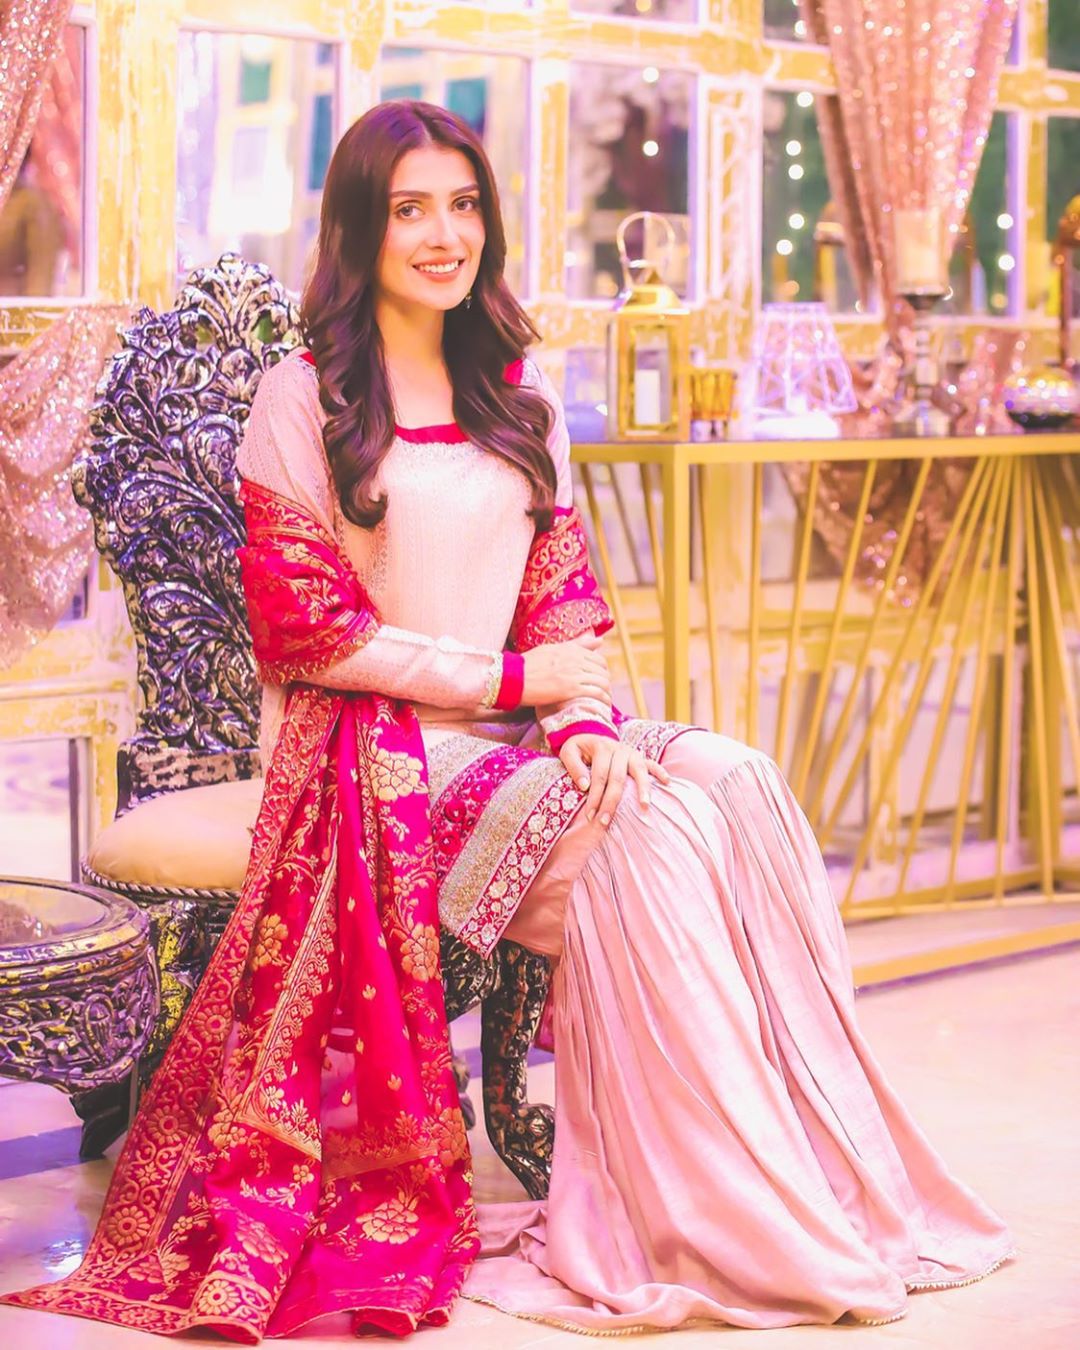 The Most Well-Dressed Pakistani Actresses